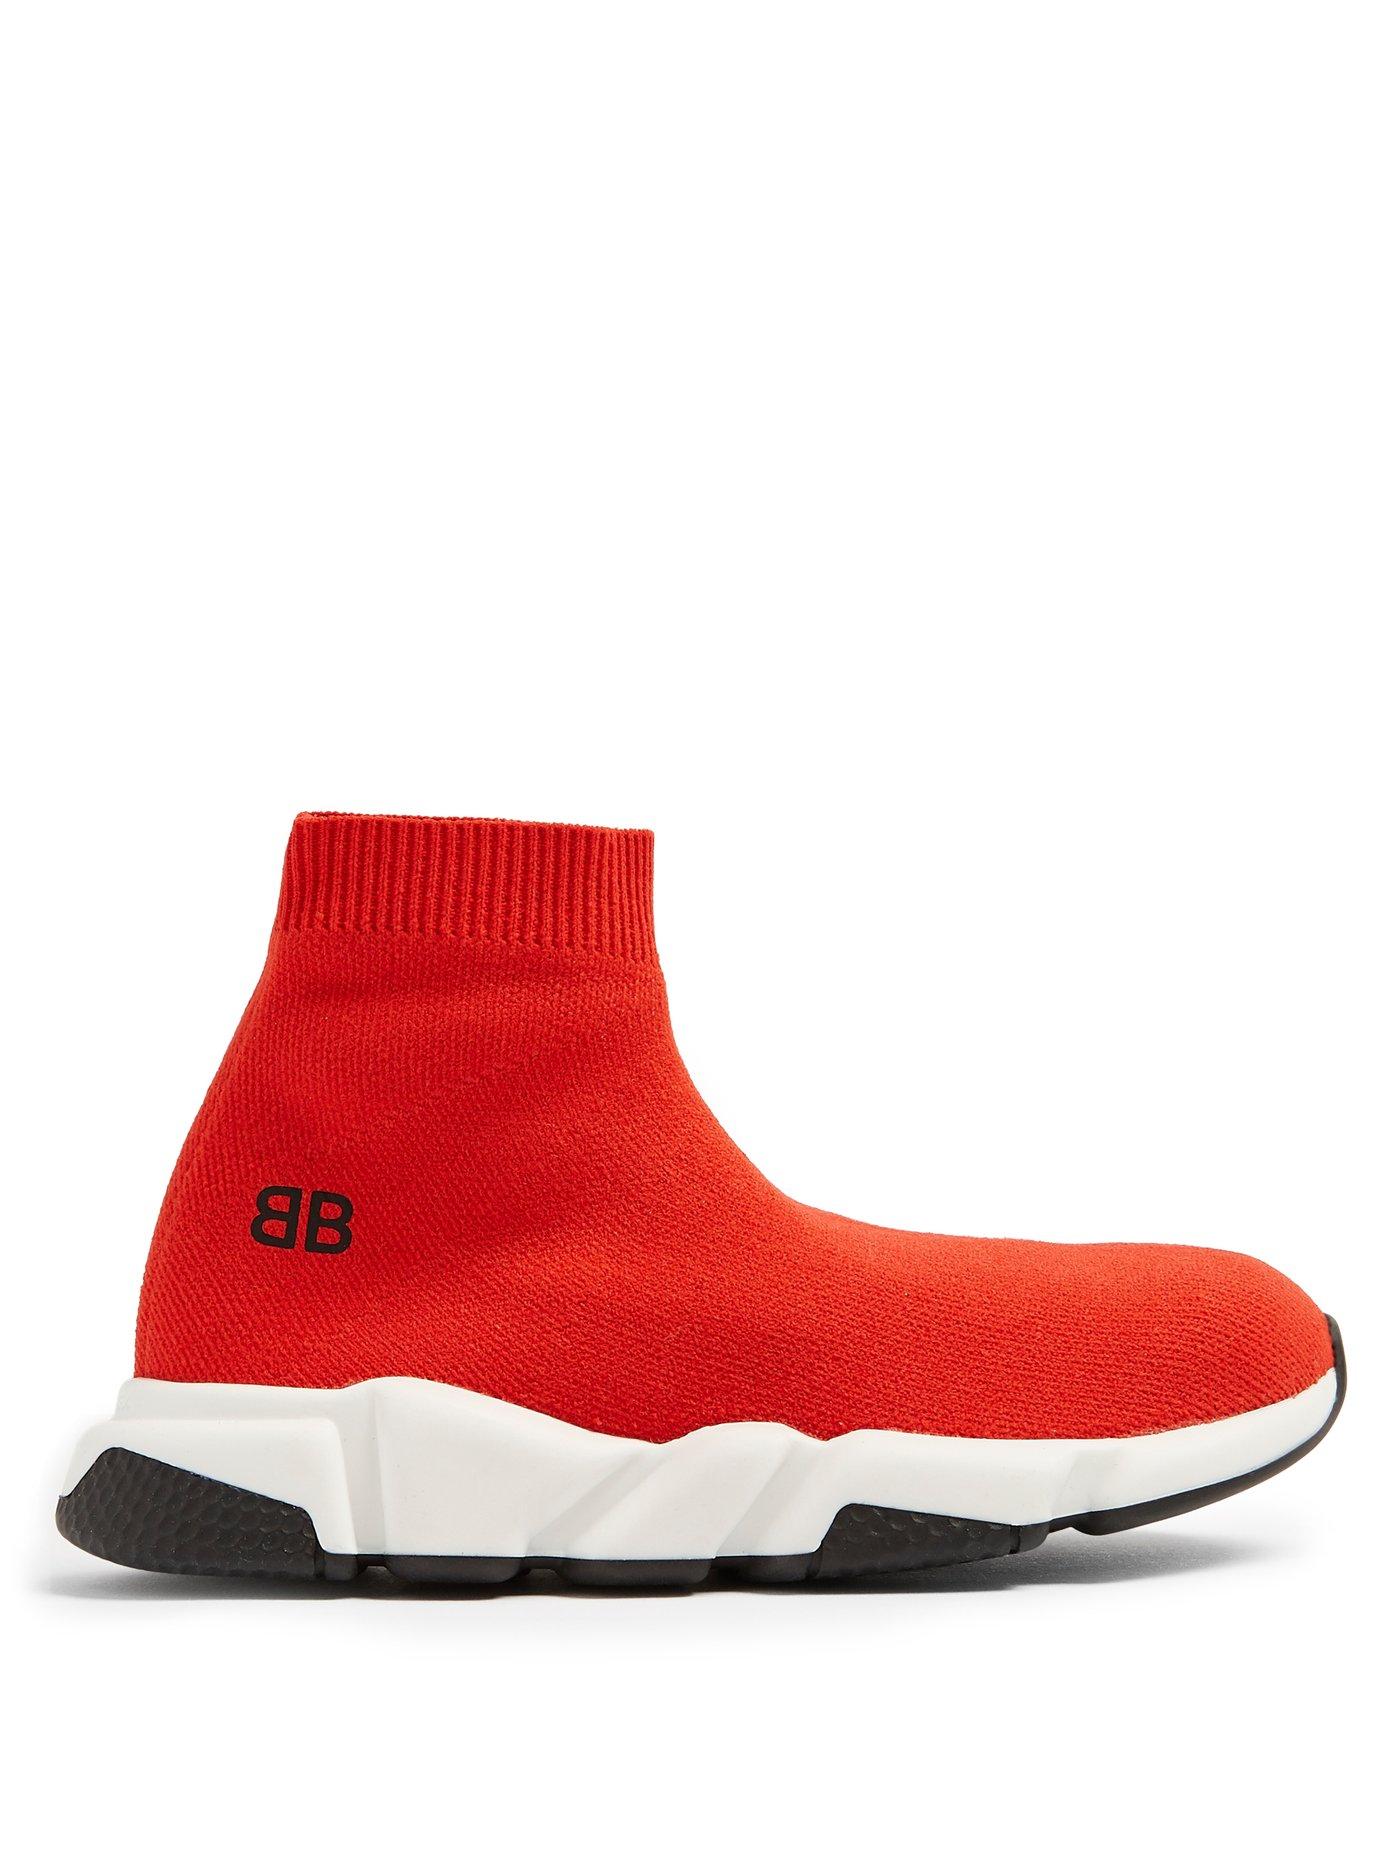 Balenciaga's Kids Shoes Are Here They Cost